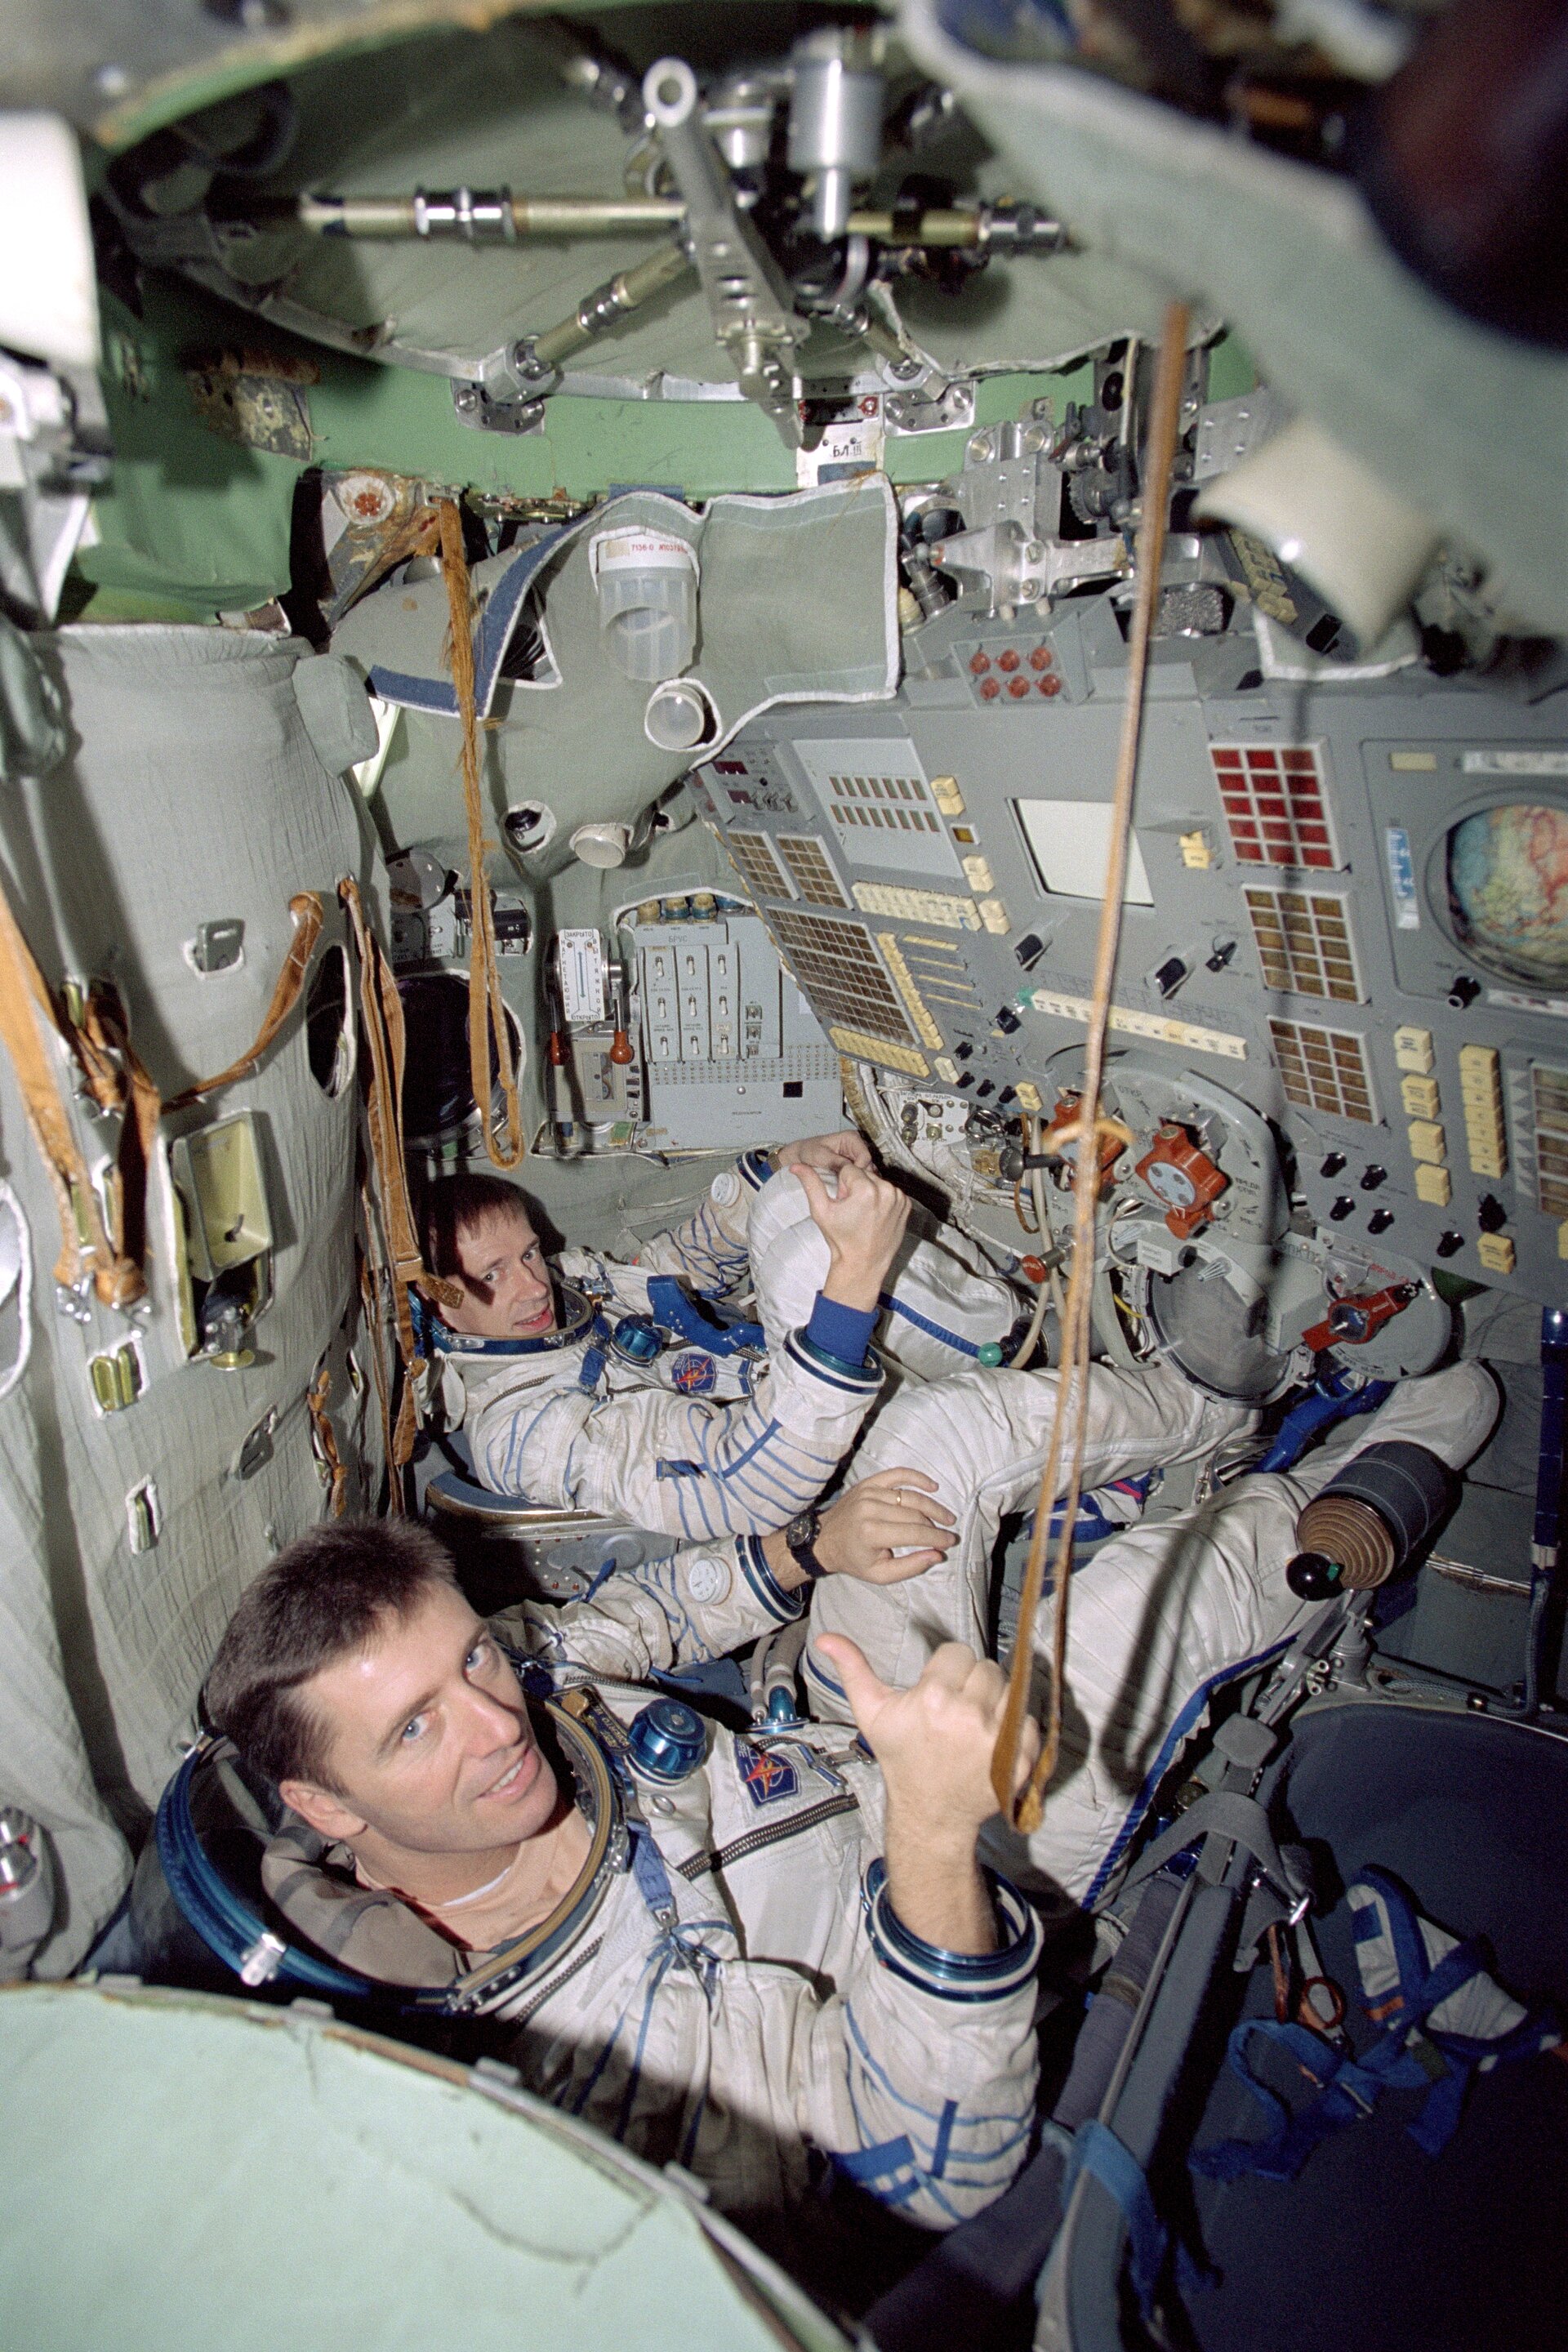 Vittori and De Winne during astronaut training at Star City near Moscow